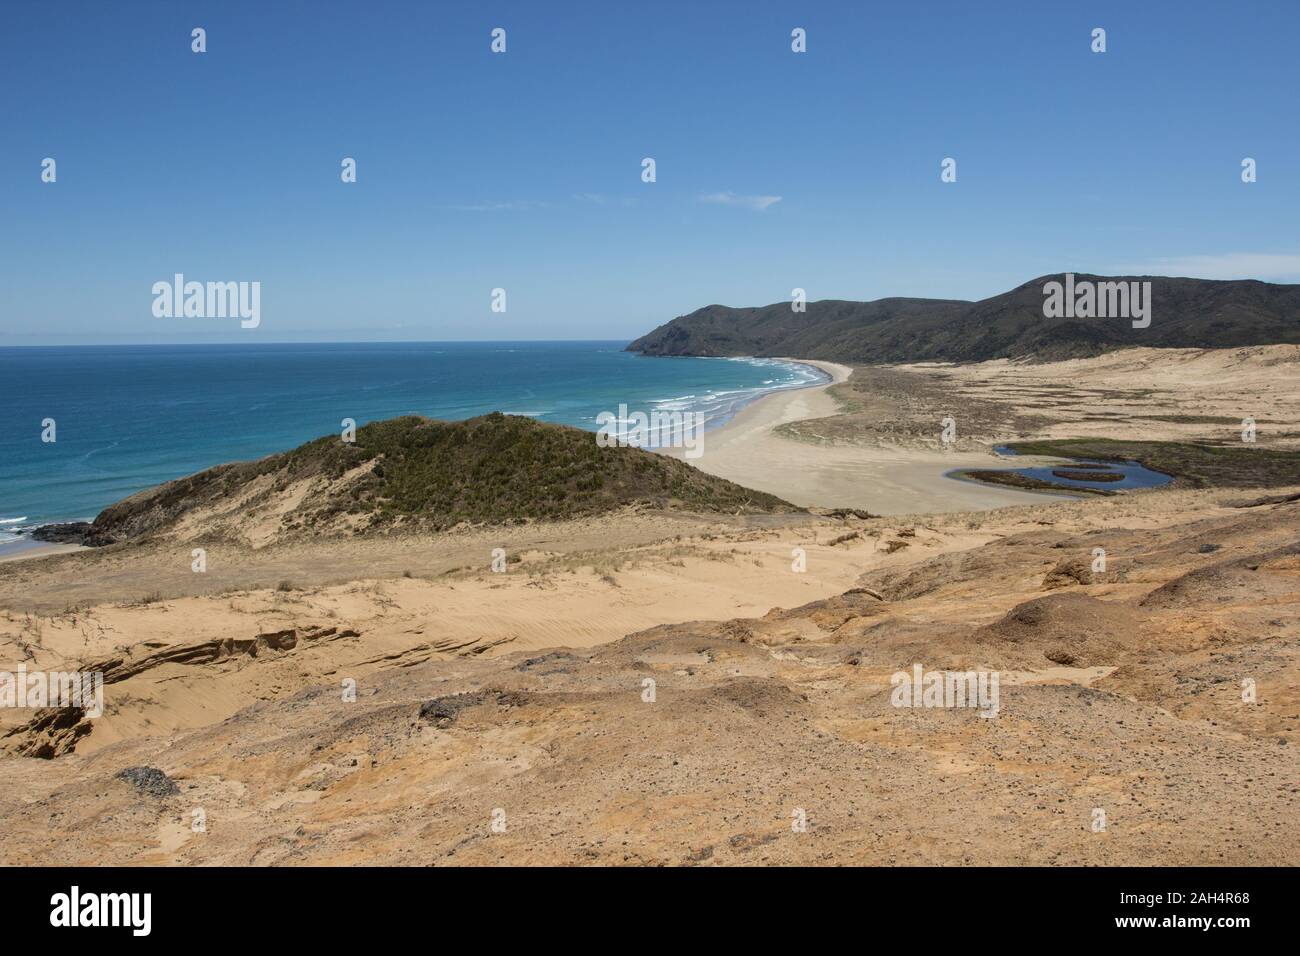 Te Werahi Beach and Cape Reinga as seen from the cream clay hills of the Te Paki Coastal Track, a four day hiking trail in Northland, New Zealand. Stock Photo